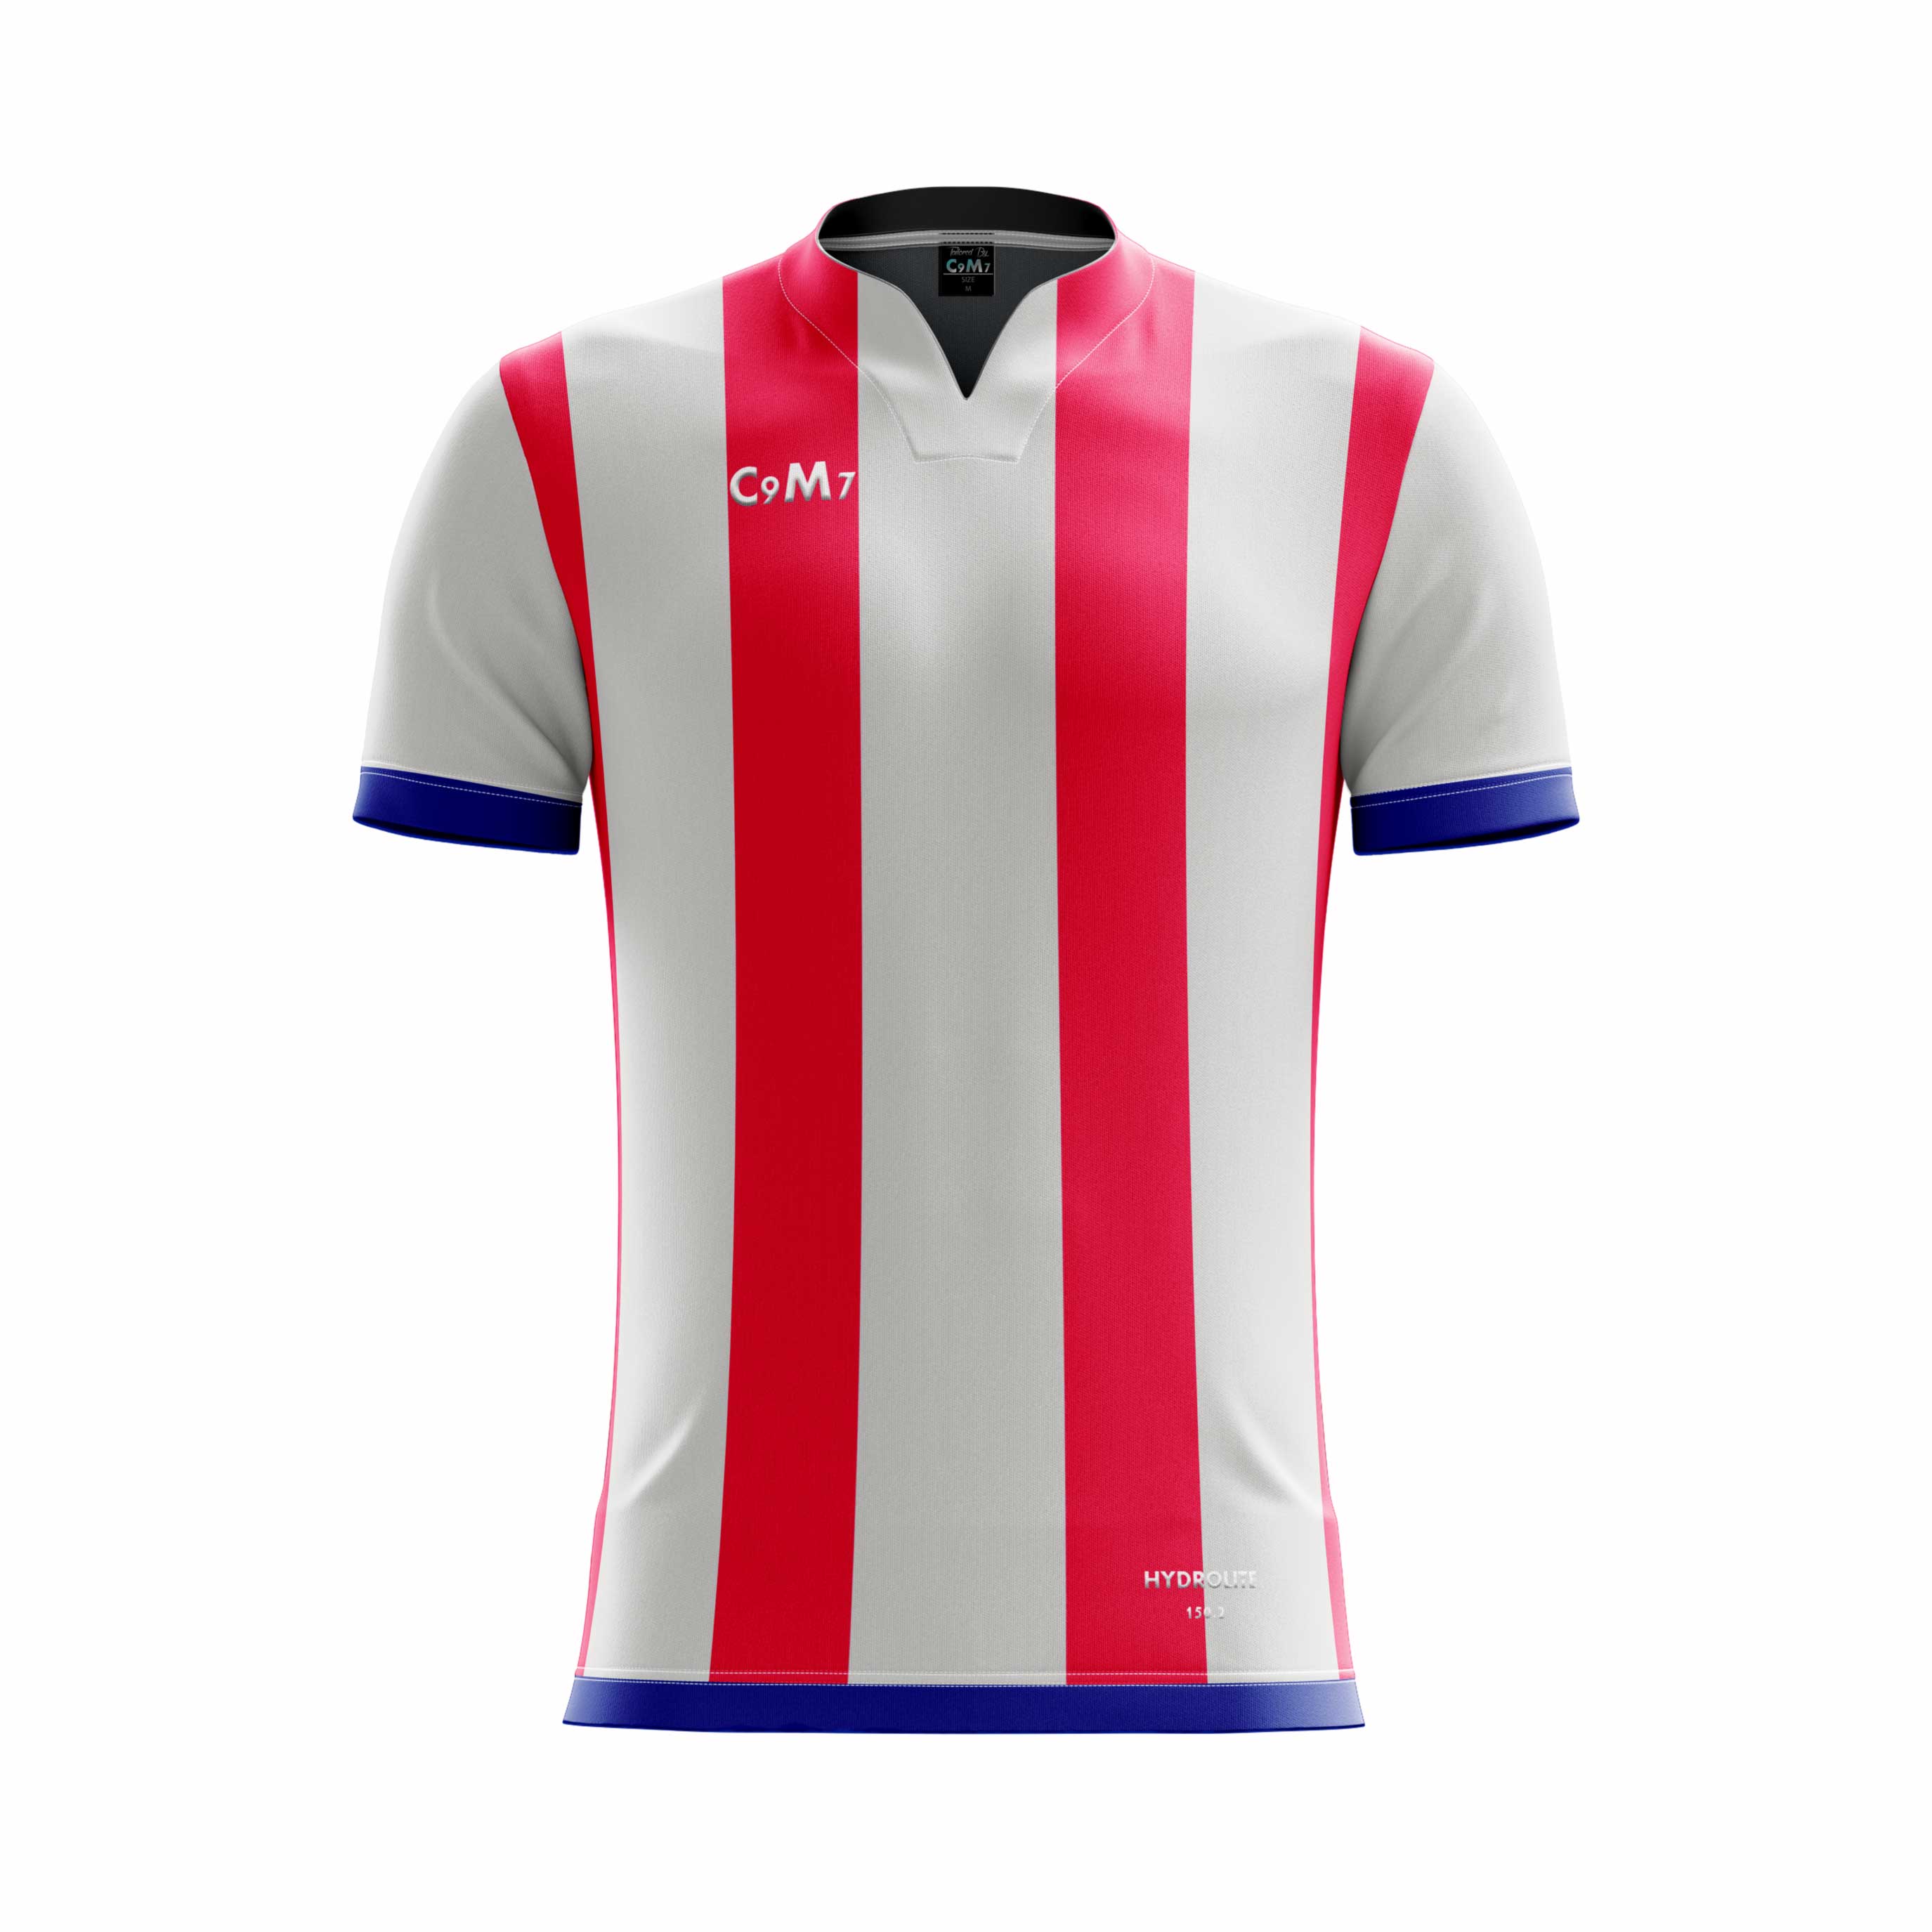 red and white football jersey